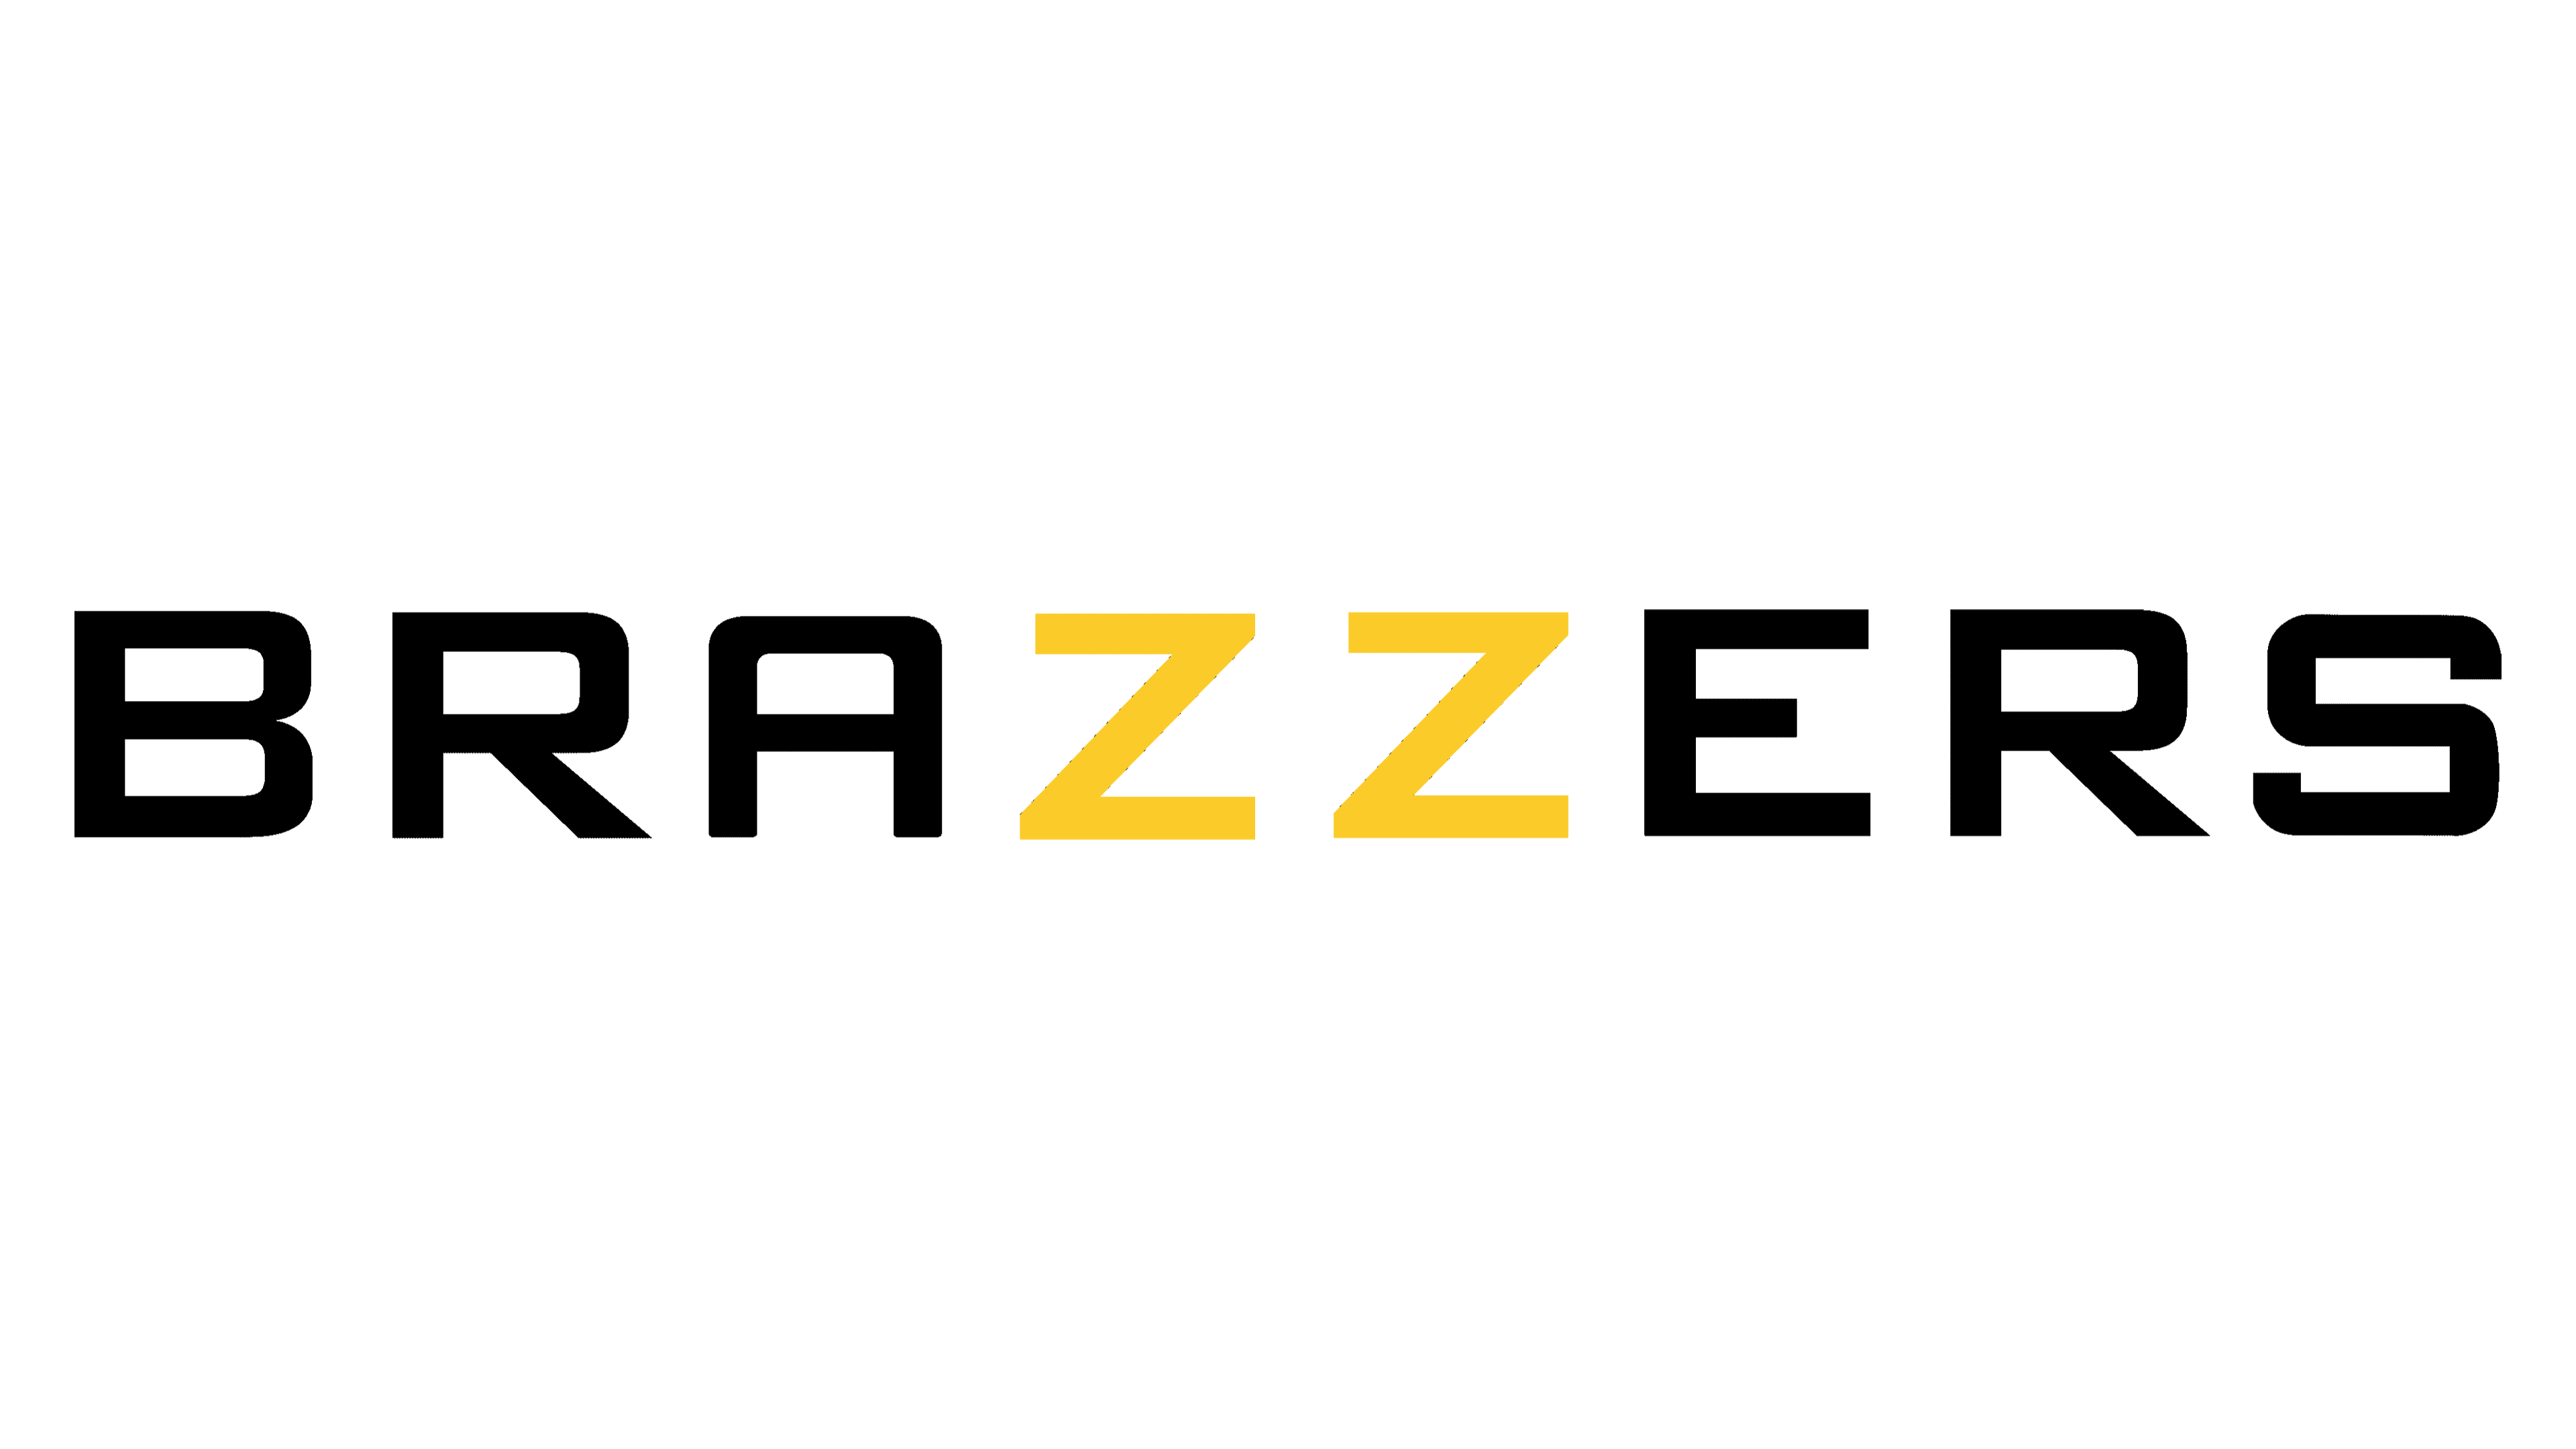 Xbrax C Com - Brazzers Logo and symbol, meaning, history, PNG, brand